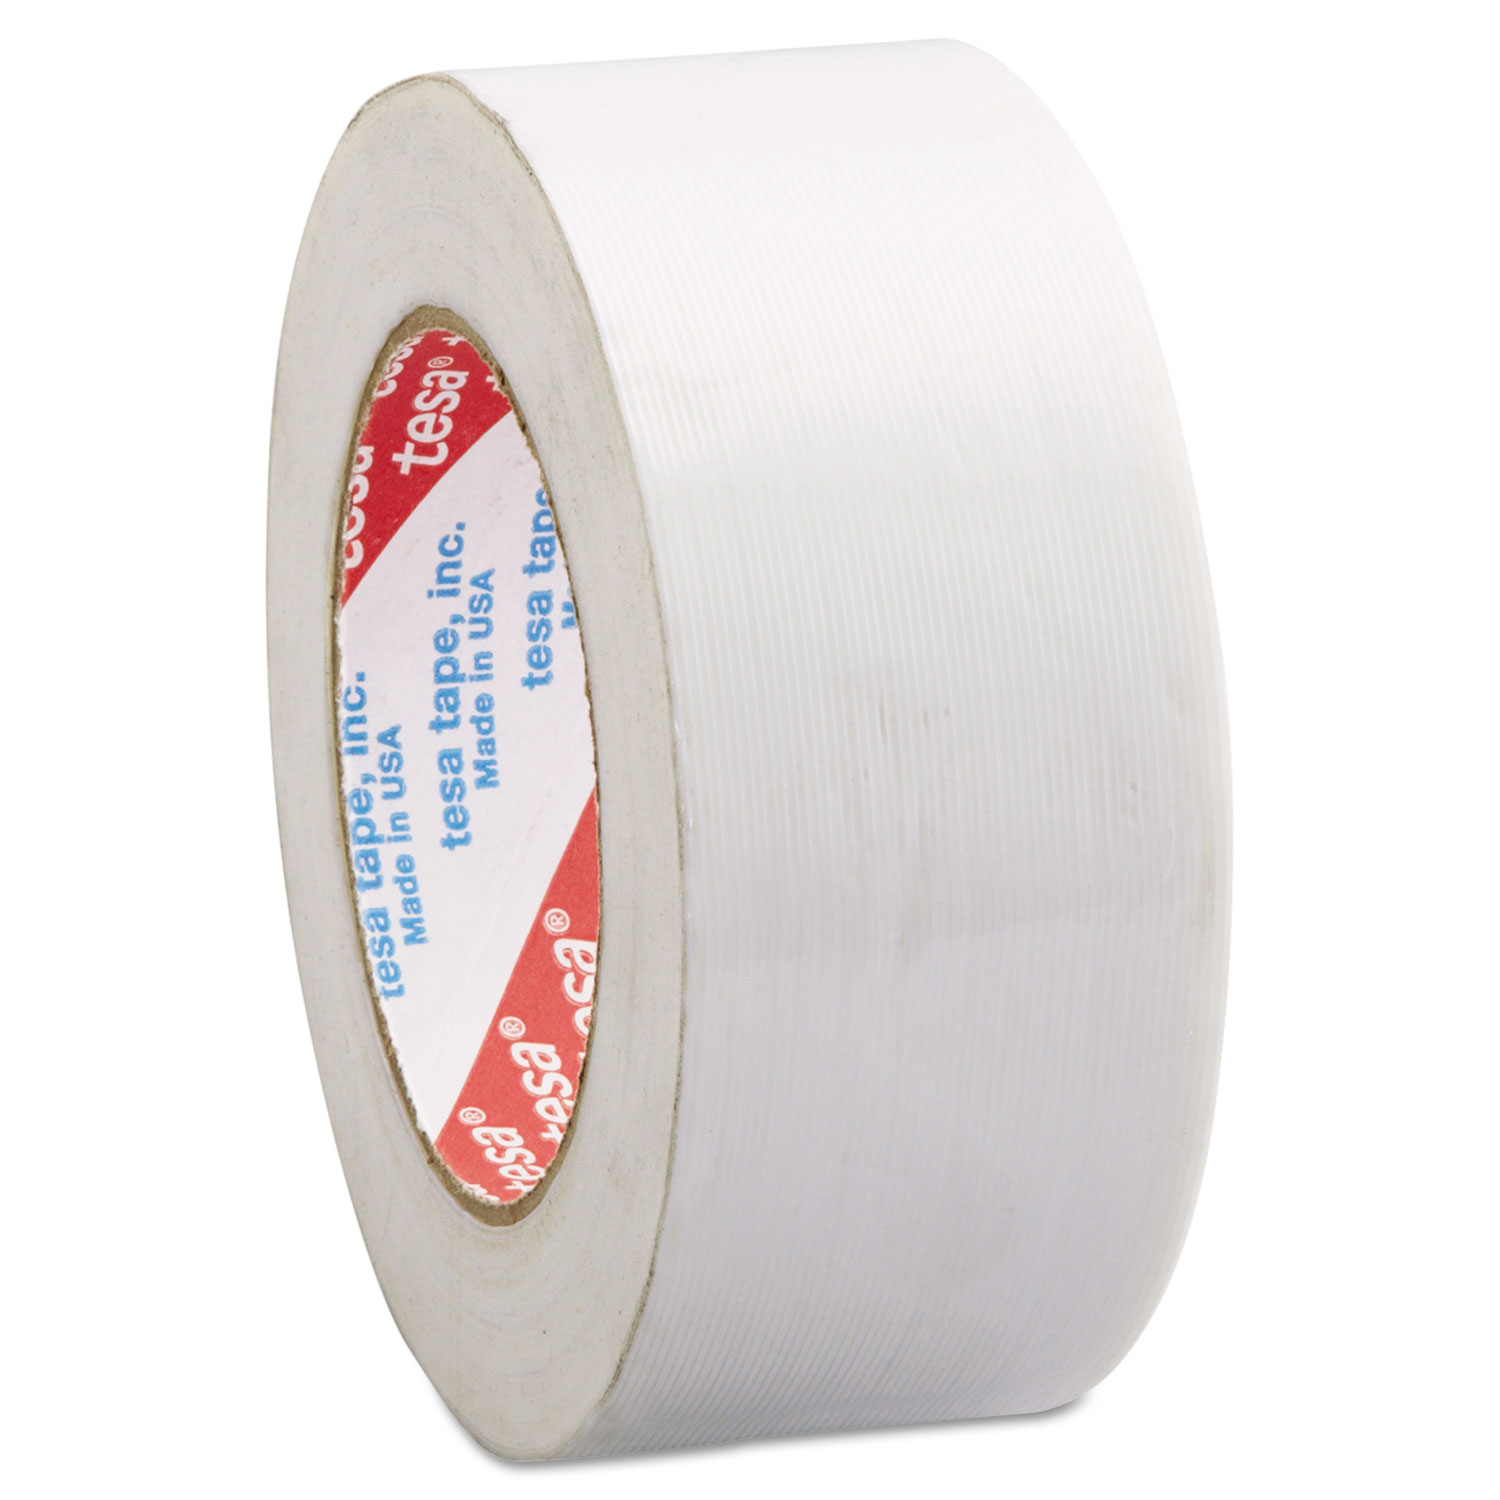 319 Performance Grade Filament Strapping Tape, 2